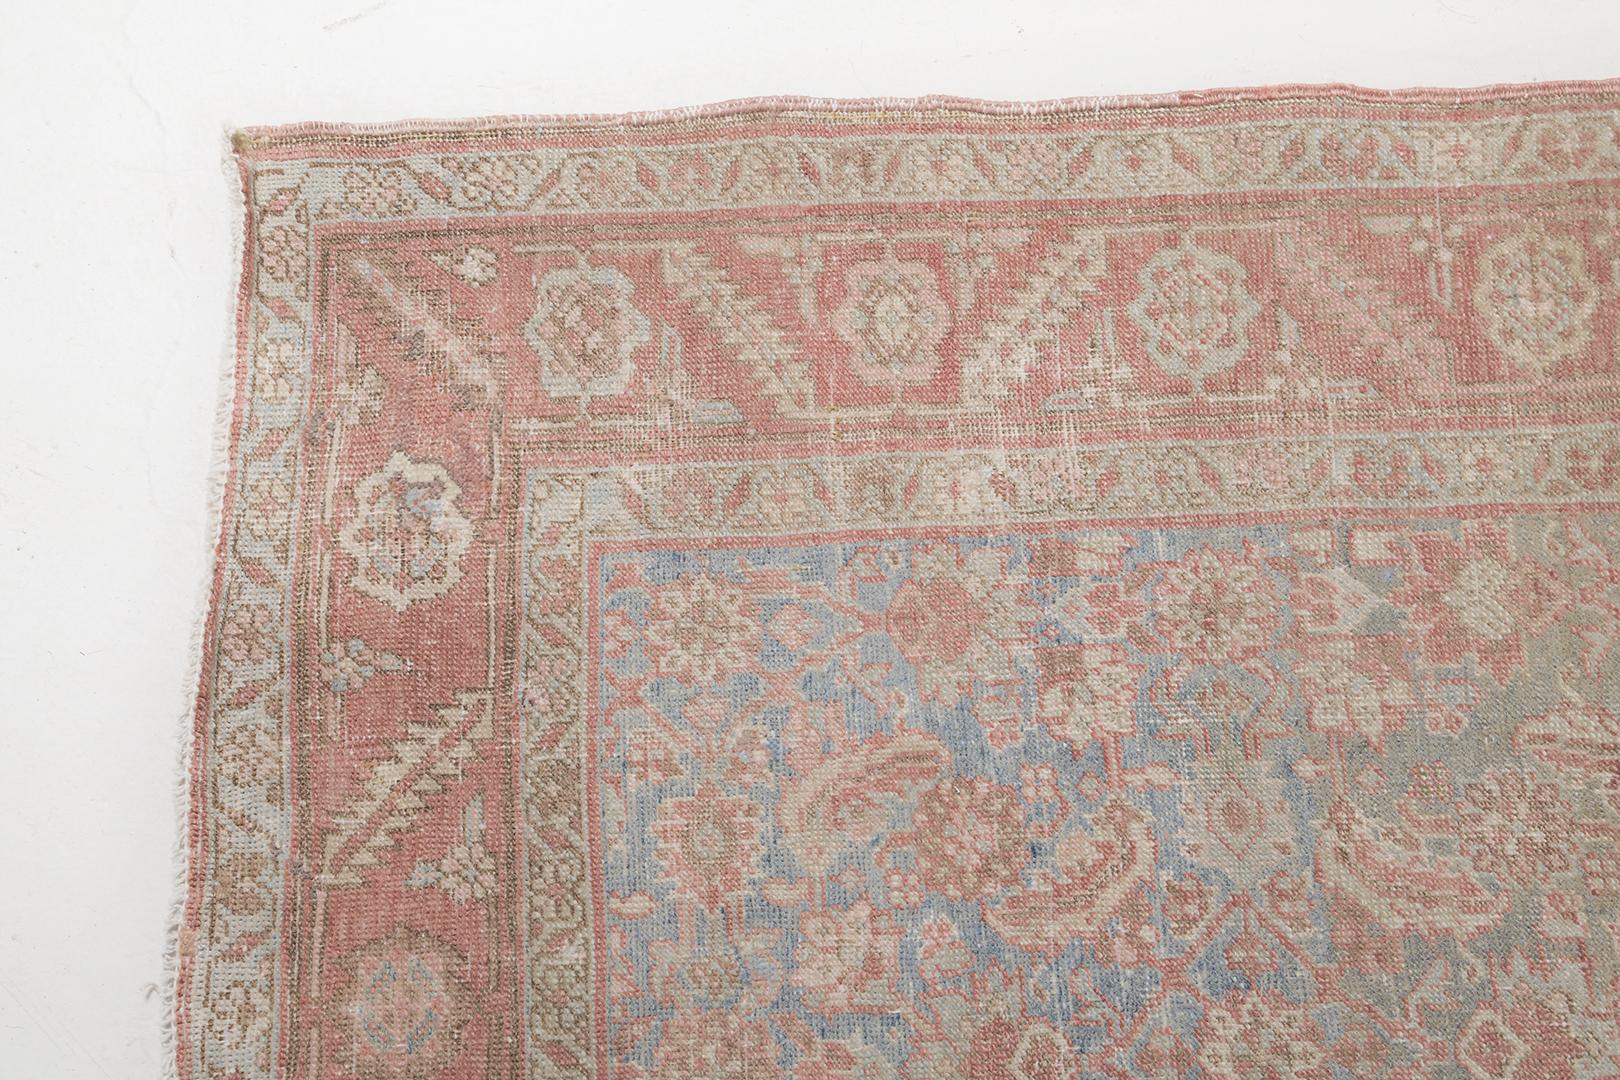 An enchanting Antique Persian Bakhsyayesh rug that features a myriad of botanical elements flourishing in the abrashed field in the most desirable warm tones. Enclosed floral meander inner and outer guard band, this rug displays an captivating